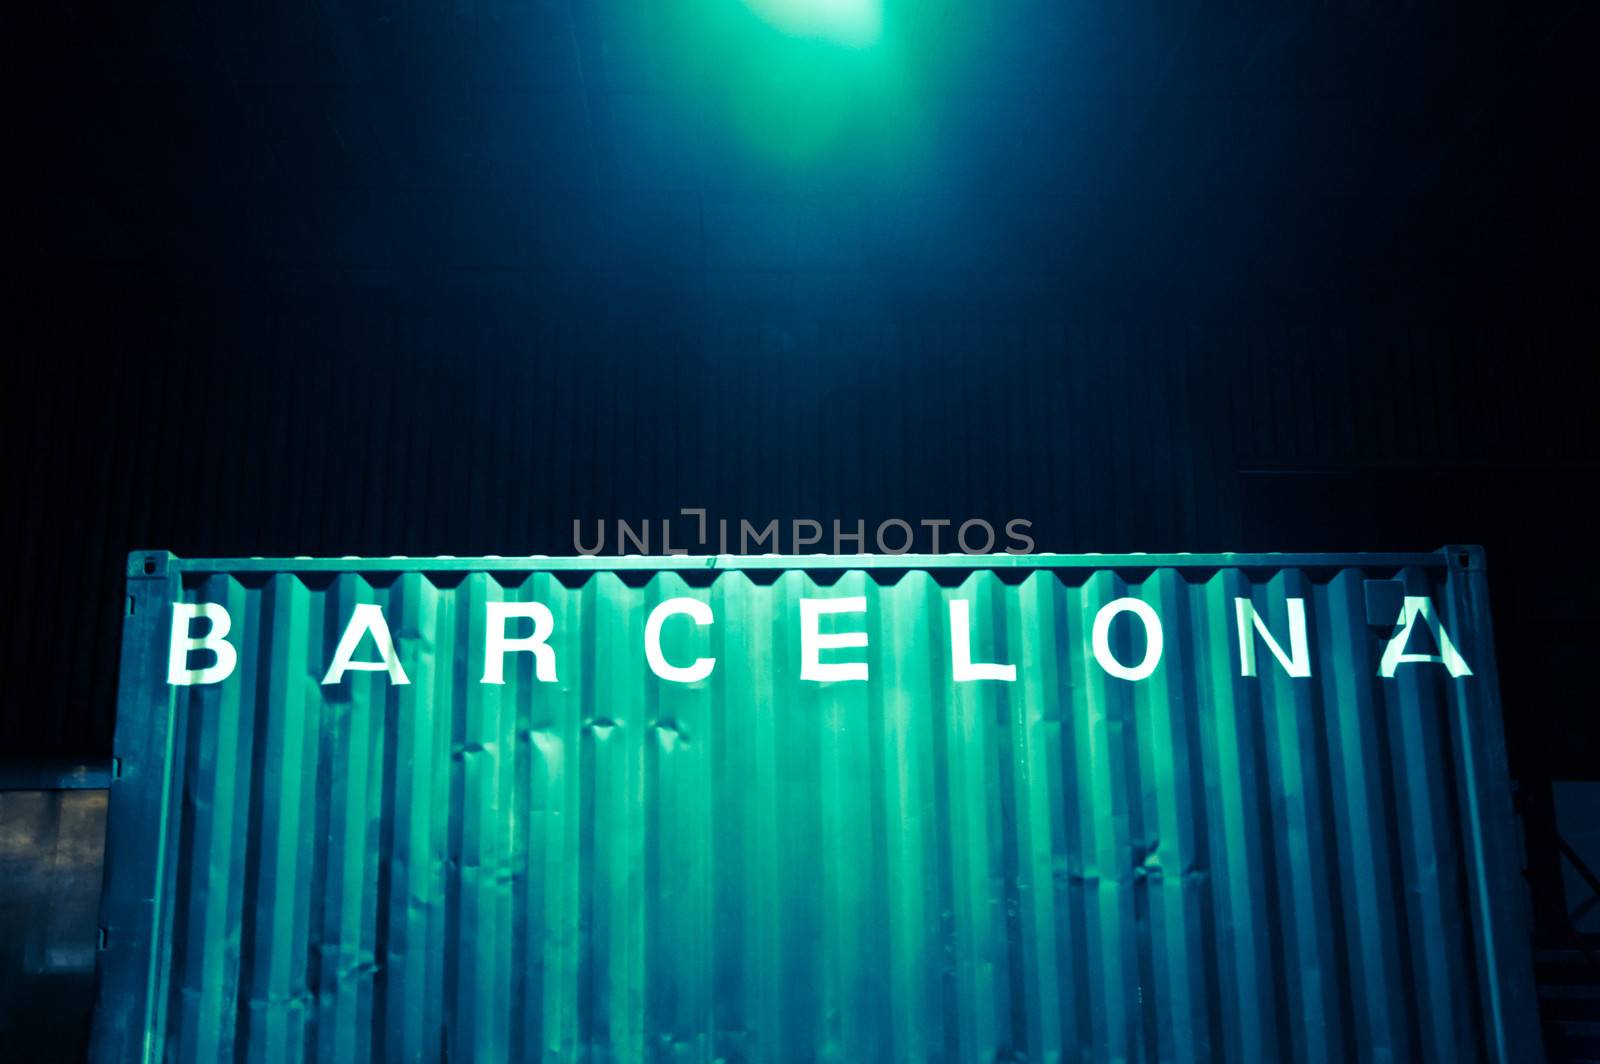 Barcelona lettering on a container at night   by watchtheworld